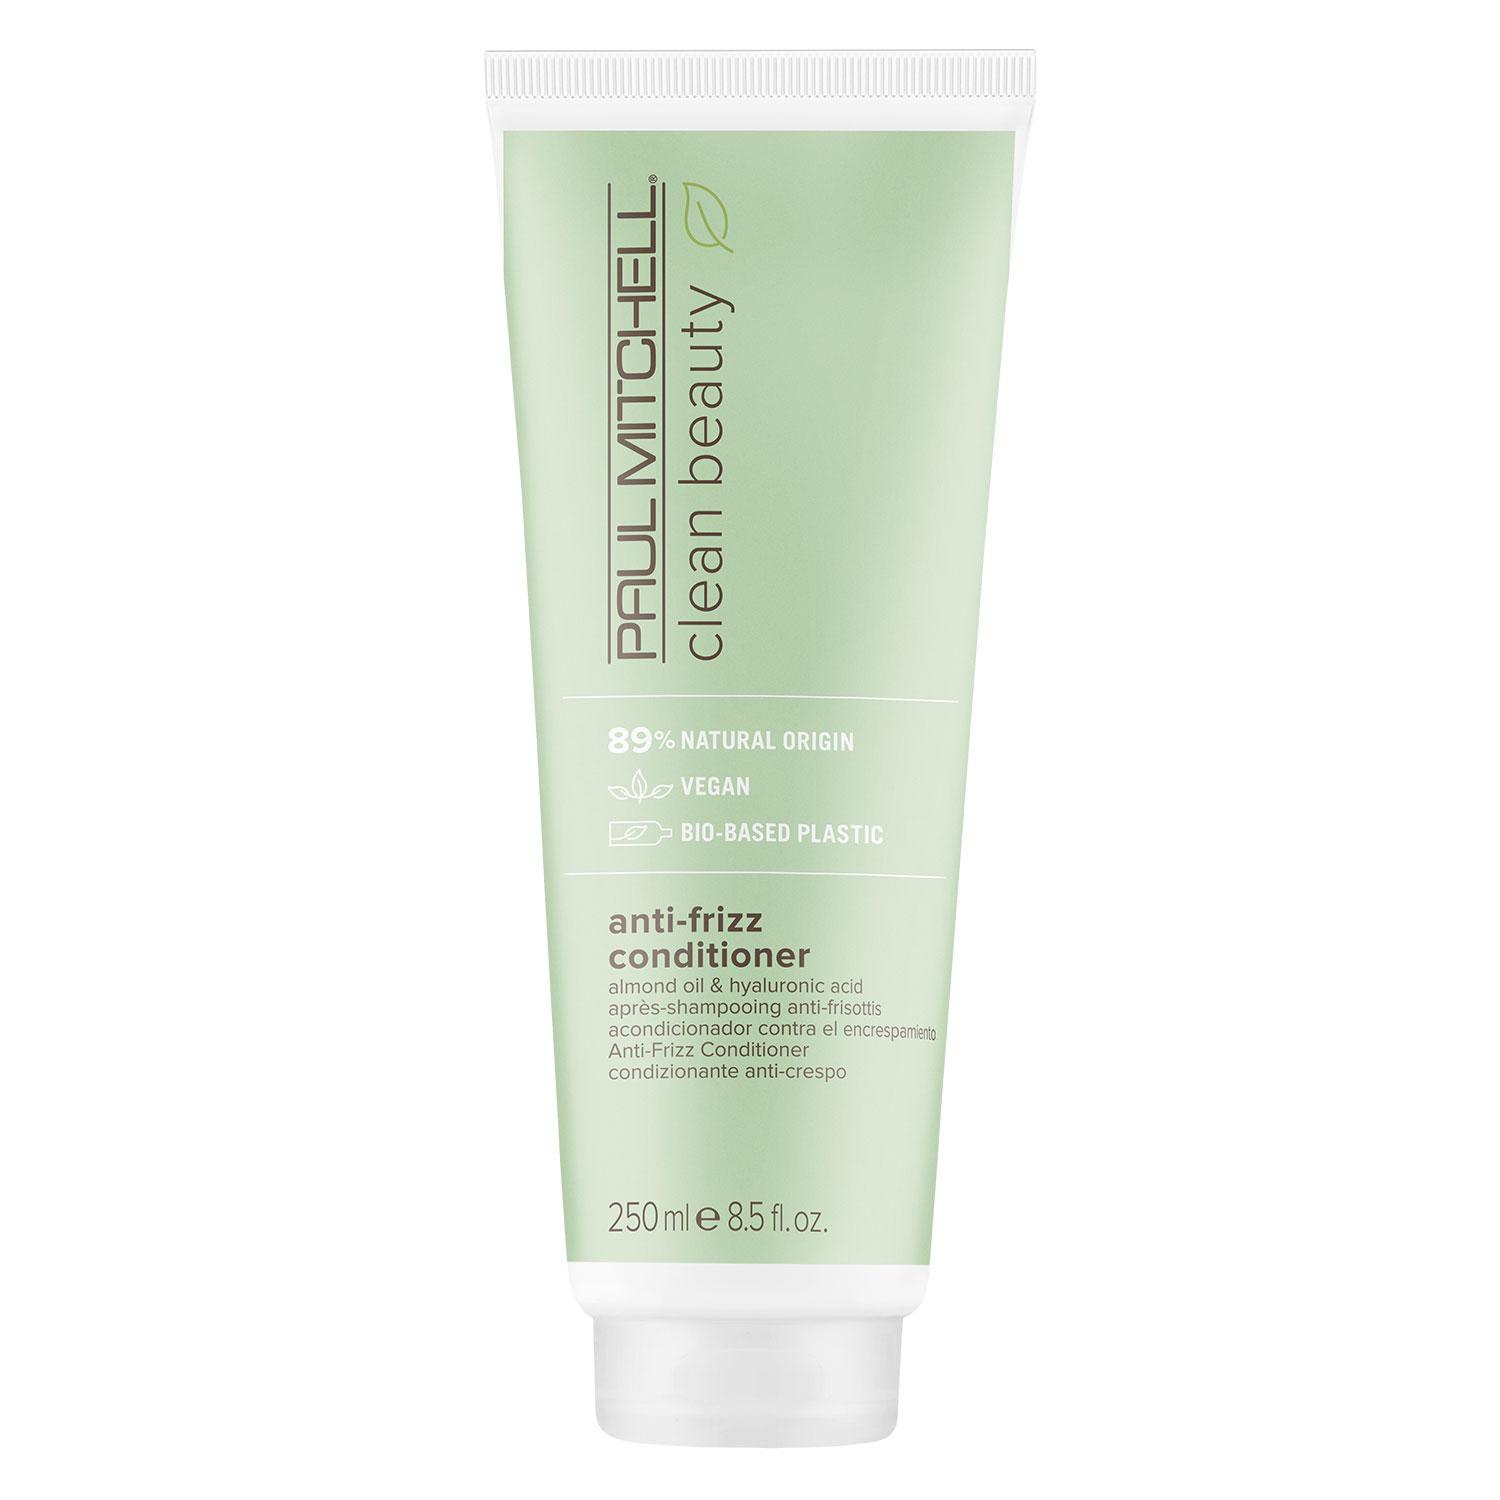 Paul Mitchell Clean Beauty - Anti-Frizz Conditioner